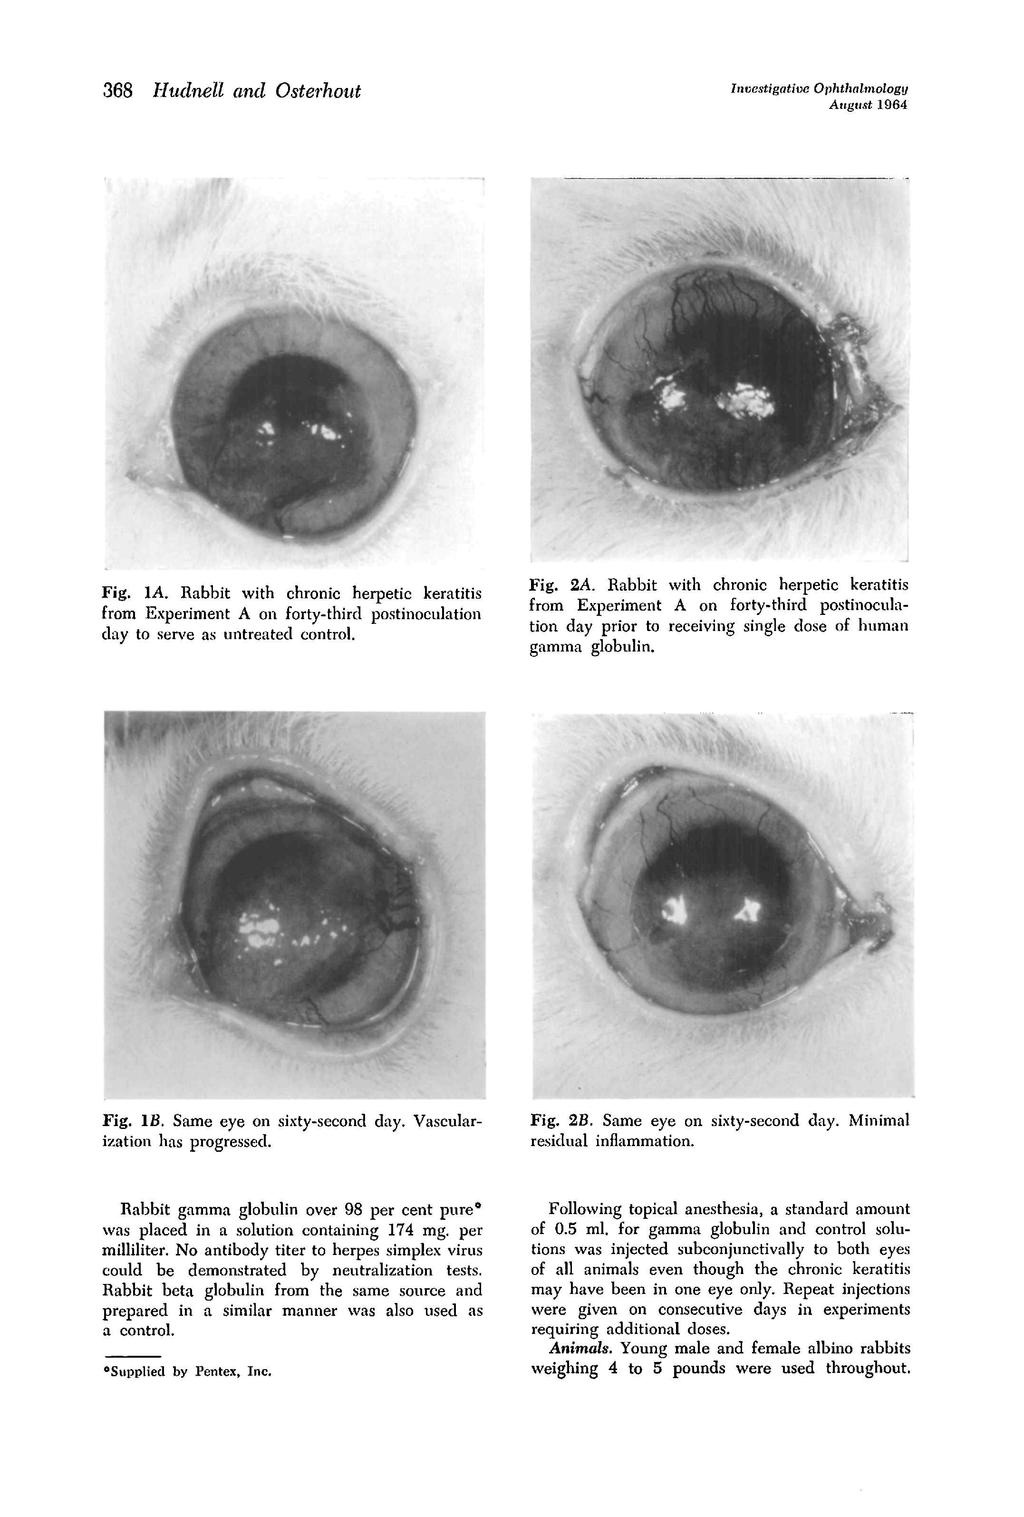 68 Hudnell and Osterhout stigativc Ophthalmology August 96 Fig. A. Rabbit with chronic herpetic keratitis from Experiment A on forty-third postinoculation day to serve as untreated control. Fig. A. Rabbit with chronic herpetic keratitis from Experiment A on forty-third postinoculation day prior to receiving single dose of human gamma globulin.